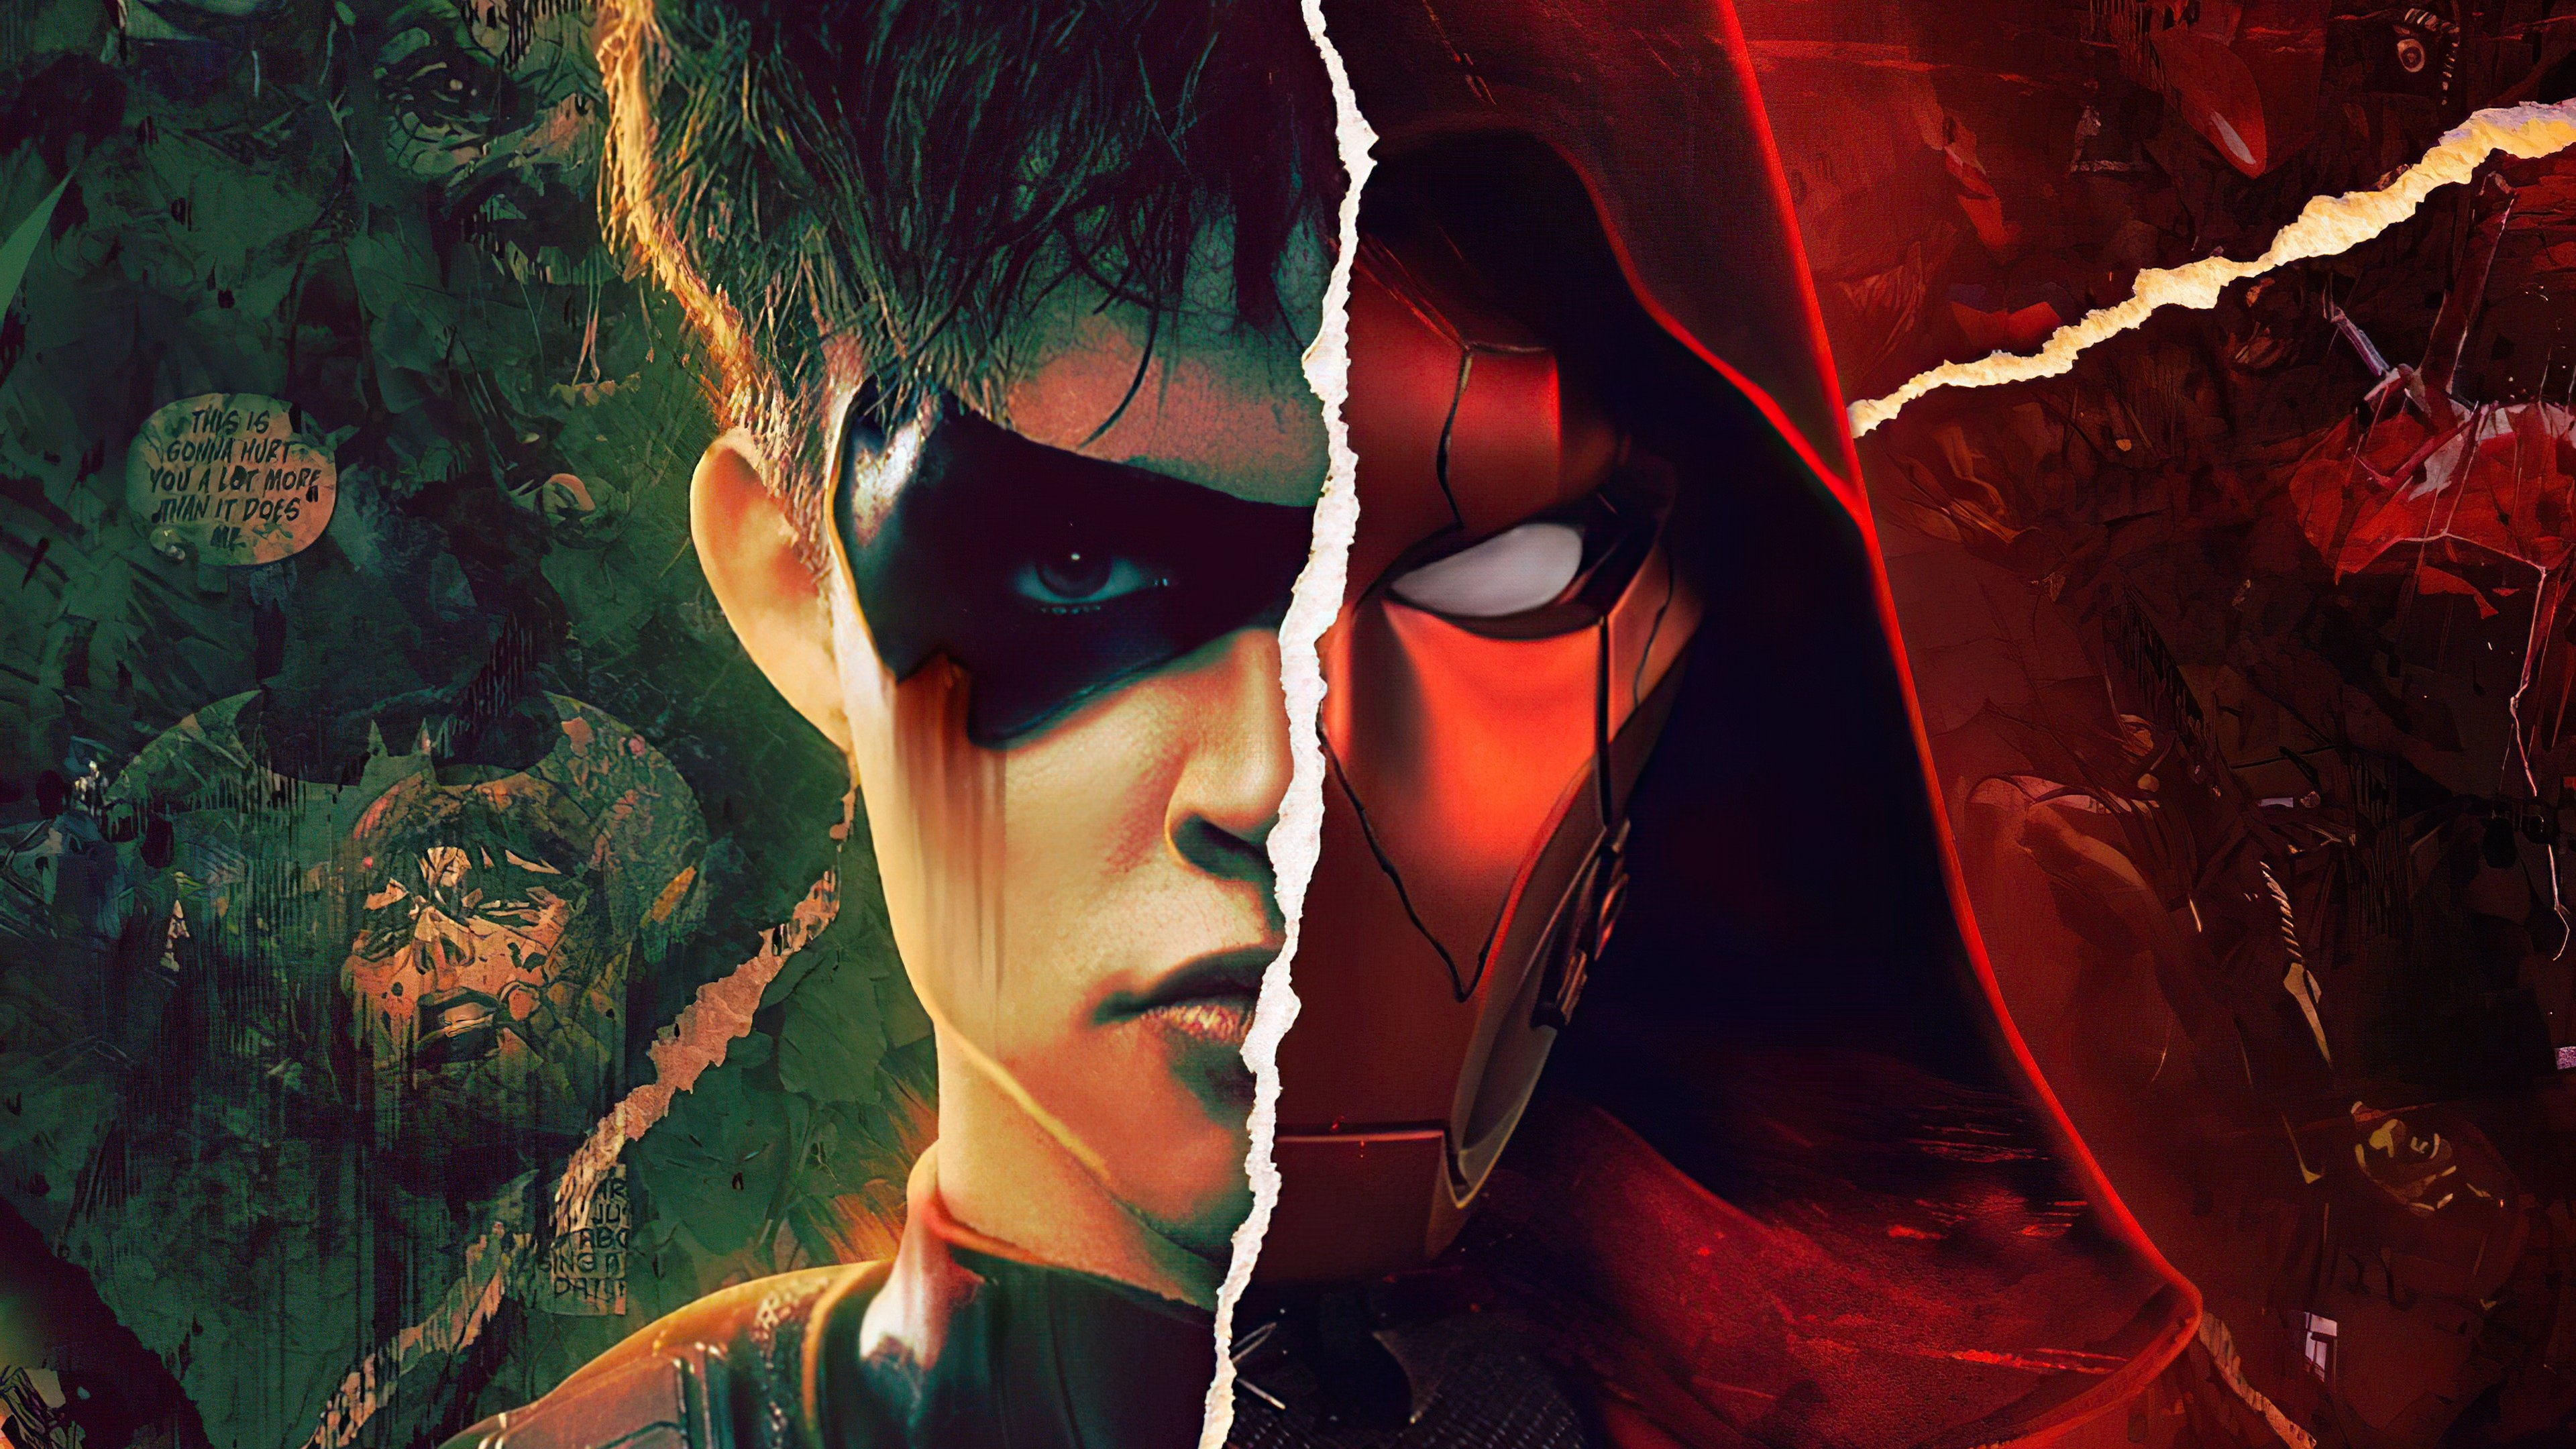 Jason Todd X Red Hood Wallpaper Hd Tv Series 4k Wallpapers Images Photos And Background Wallpapers Den